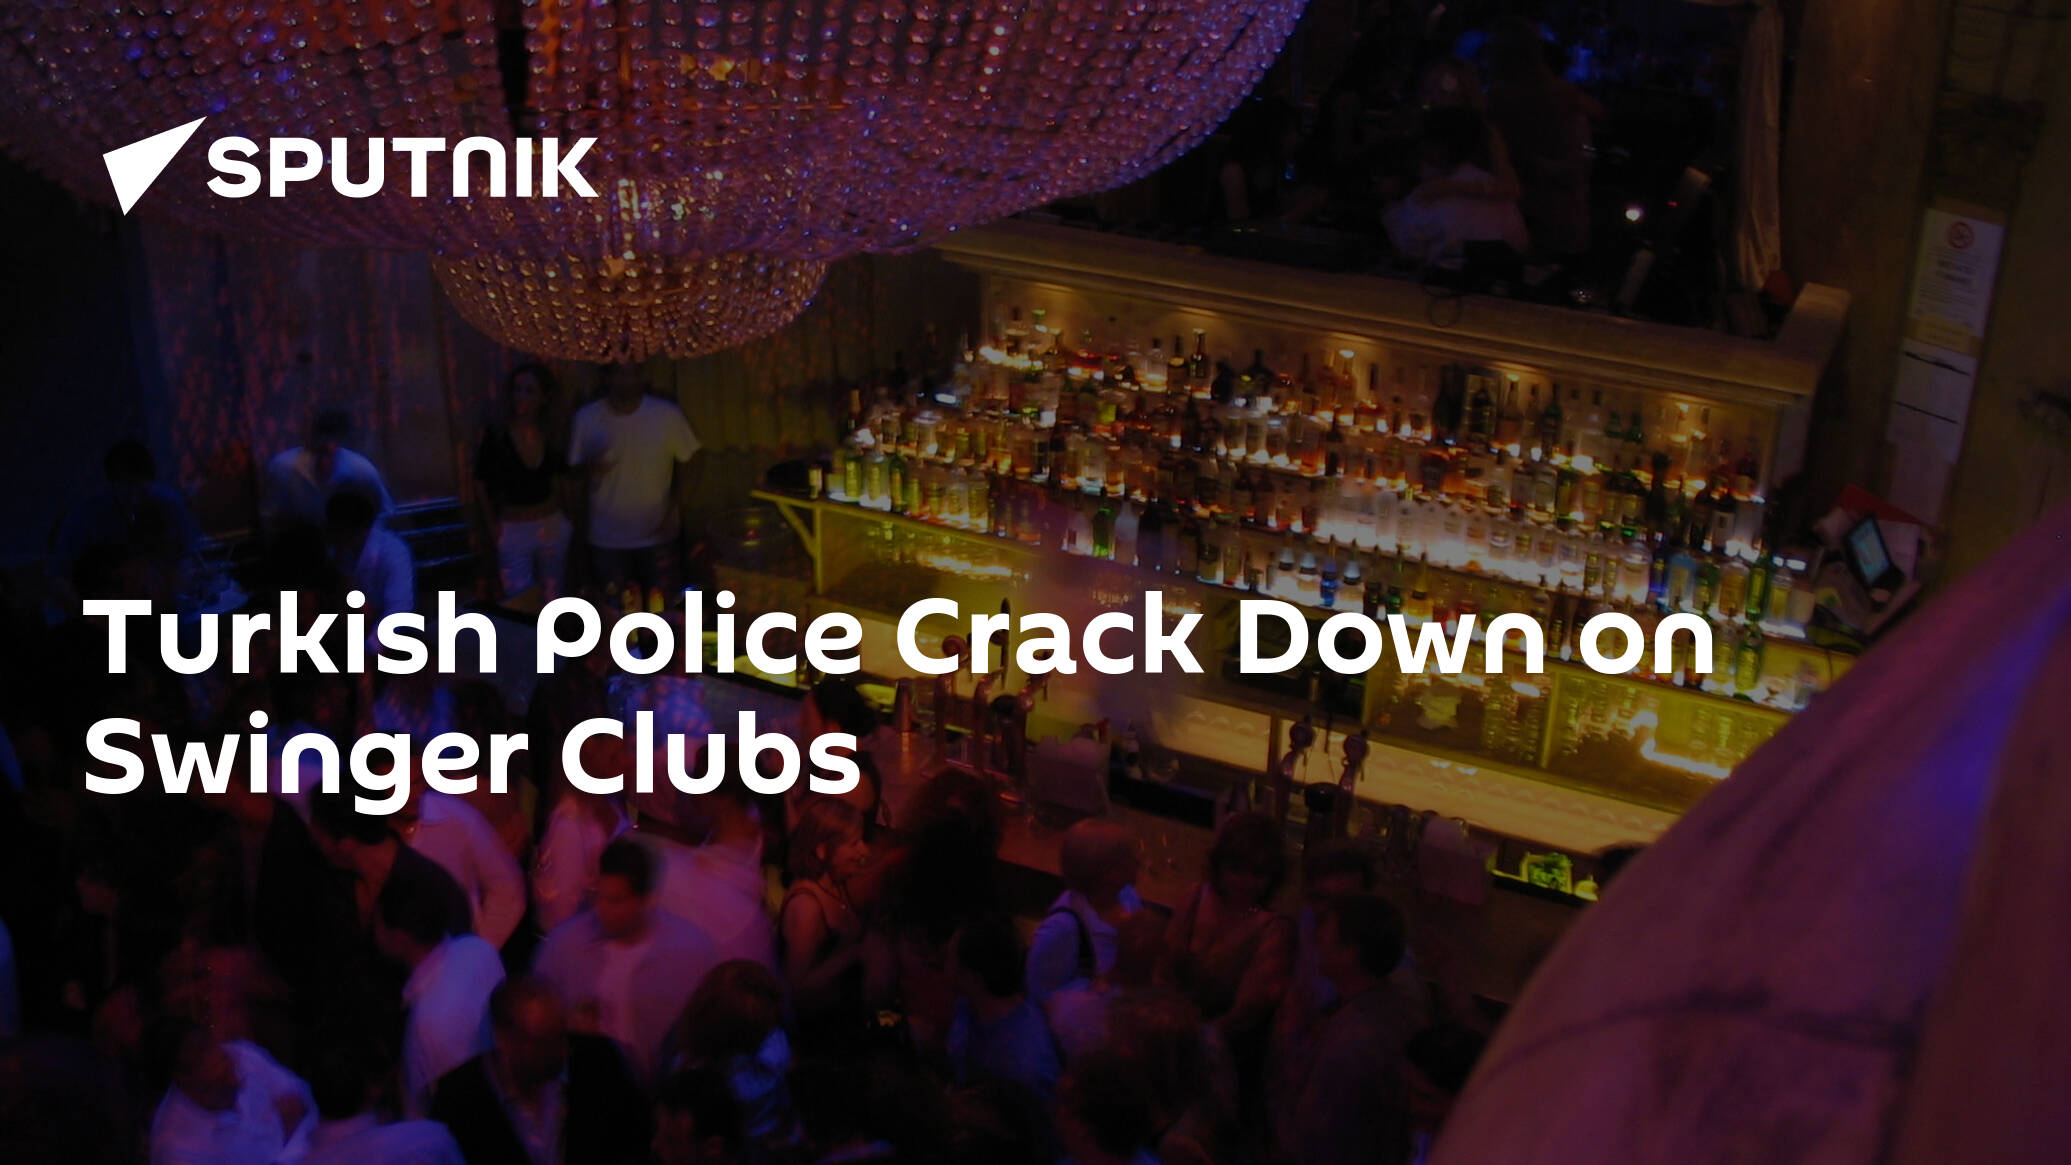 Turkish Police Crack Down on Swinger Clubs pic pic